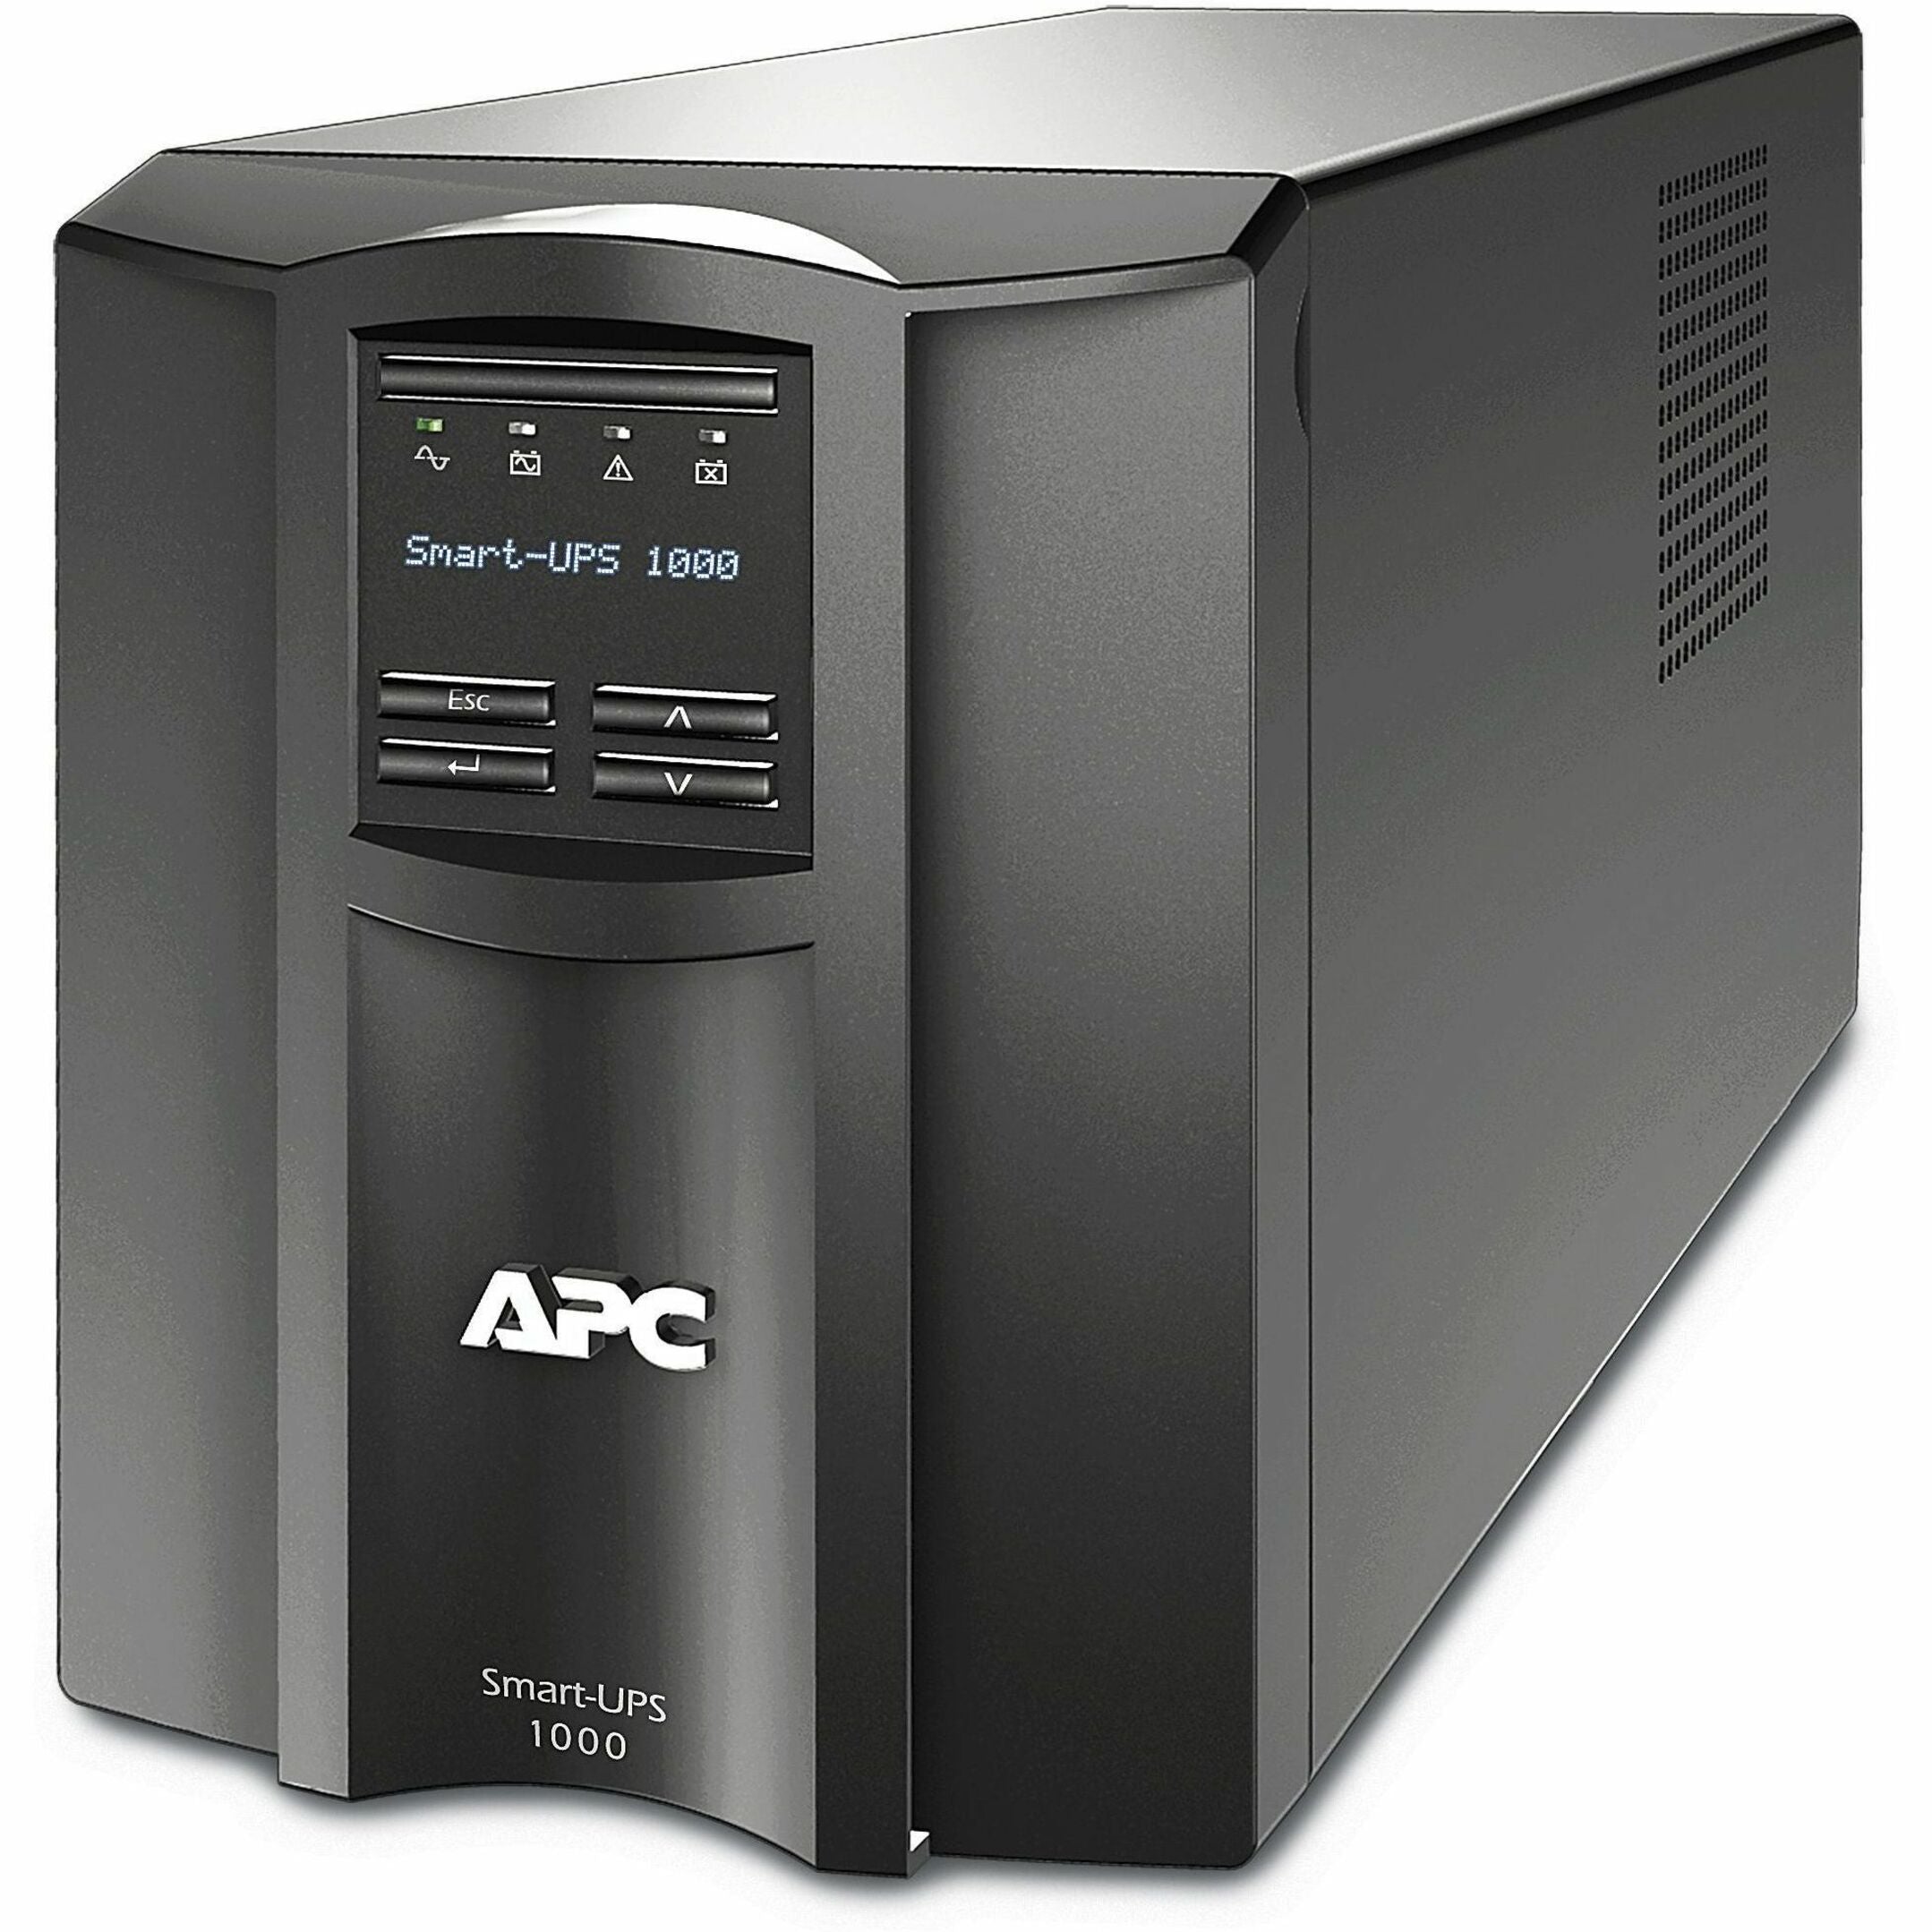 APC SMT1000C Smart-UPS 1000VA LCD 120V with SmartConnect, Energy Star, 3 Year Warranty